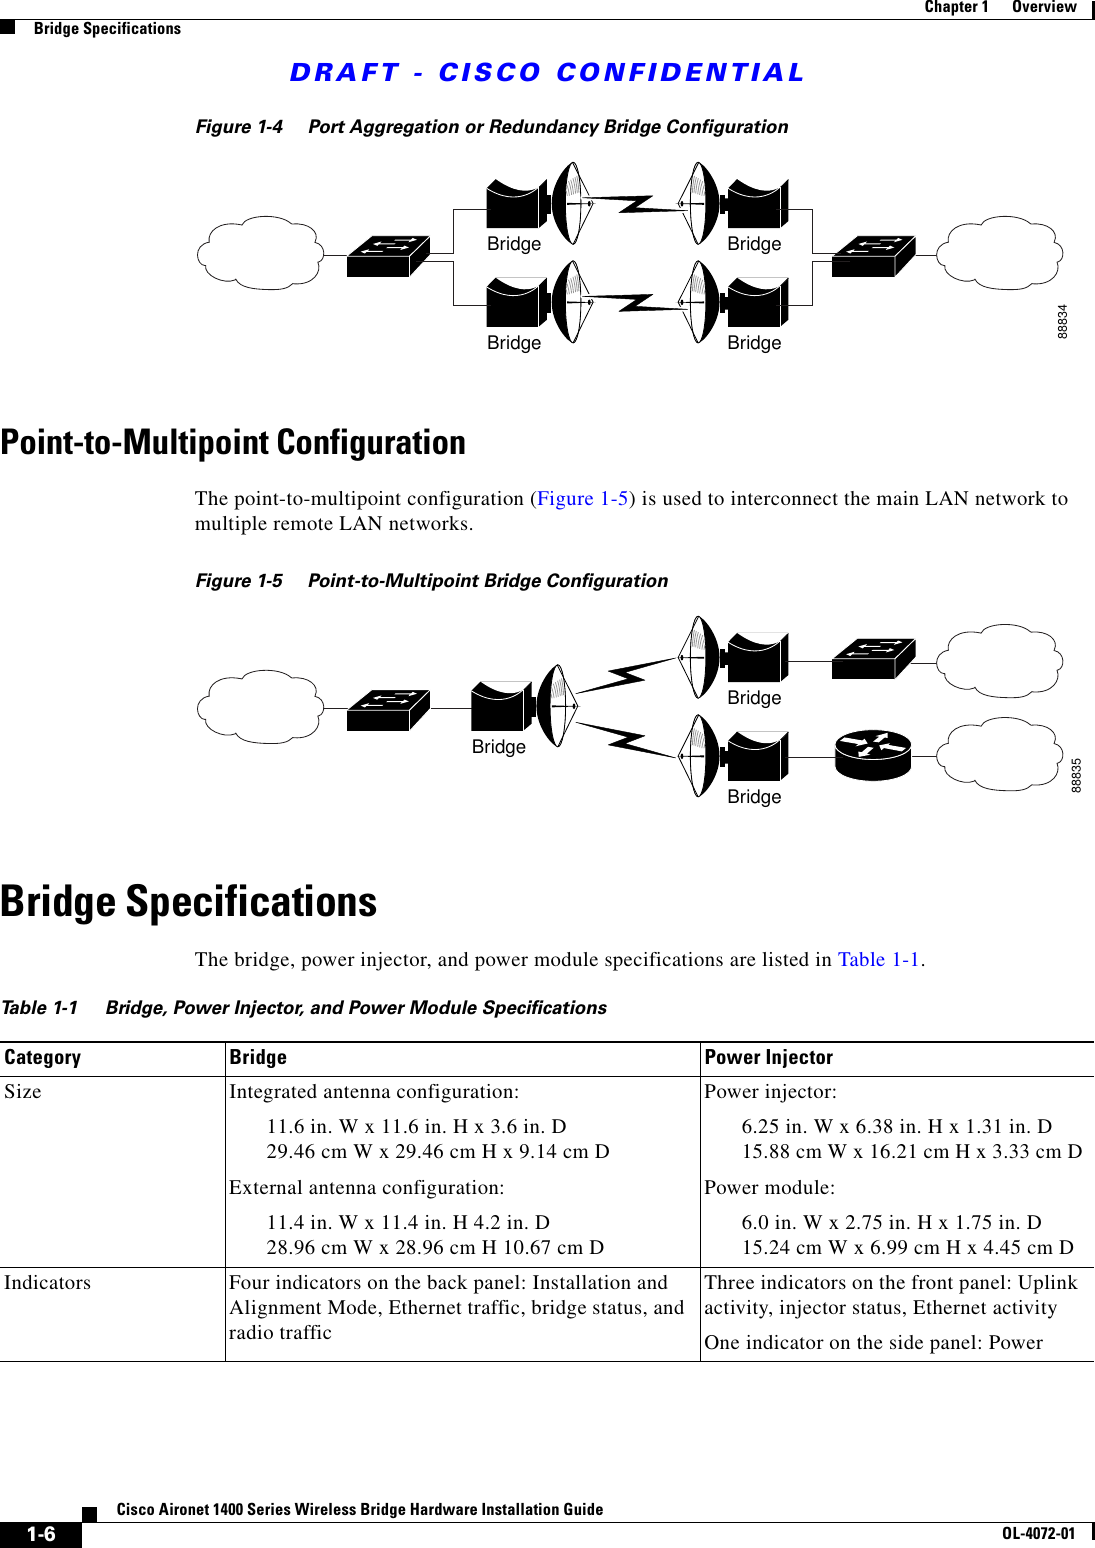 DRAFT - CISCO CONFIDENTIAL1-6Cisco Aironet 1400 Series Wireless Bridge Hardware Installation GuideOL-4072-01Chapter 1      OverviewBridge SpecificationsFigure 1-4 Port Aggregation or Redundancy Bridge ConfigurationPoint-to-Multipoint ConfigurationThe point-to-multipoint configuration (Figure 1-5) is used to interconnect the main LAN network to multiple remote LAN networks.Figure 1-5 Point-to-Multipoint Bridge ConfigurationBridge SpecificationsThe bridge, power injector, and power module specifications are listed in Table 1-1.88834Bridge BridgeBridge Bridge88835BridgeBridgeBridgeTable 1-1 Bridge, Power Injector, and Power Module SpecificationsCategory Bridge Power InjectorSize Integrated antenna configuration:11.6 in. W x 11.6 in. H x 3.6 in. D29.46 cm W x 29.46 cm H x 9.14 cm DExternal antenna configuration:11.4 in. W x 11.4 in. H 4.2 in. D 28.96 cm W x 28.96 cm H 10.67 cm DPower injector:6.25 in. W x 6.38 in. H x 1.31 in. D15.88 cm W x 16.21 cm H x 3.33 cm DPower module:6.0 in. W x 2.75 in. H x 1.75 in. D15.24 cm W x 6.99 cm H x 4.45 cm DIndicators Four indicators on the back panel: Installation and Alignment Mode, Ethernet traffic, bridge status, and radio trafficThree indicators on the front panel: Uplink activity, injector status, Ethernet activityOne indicator on the side panel: Power